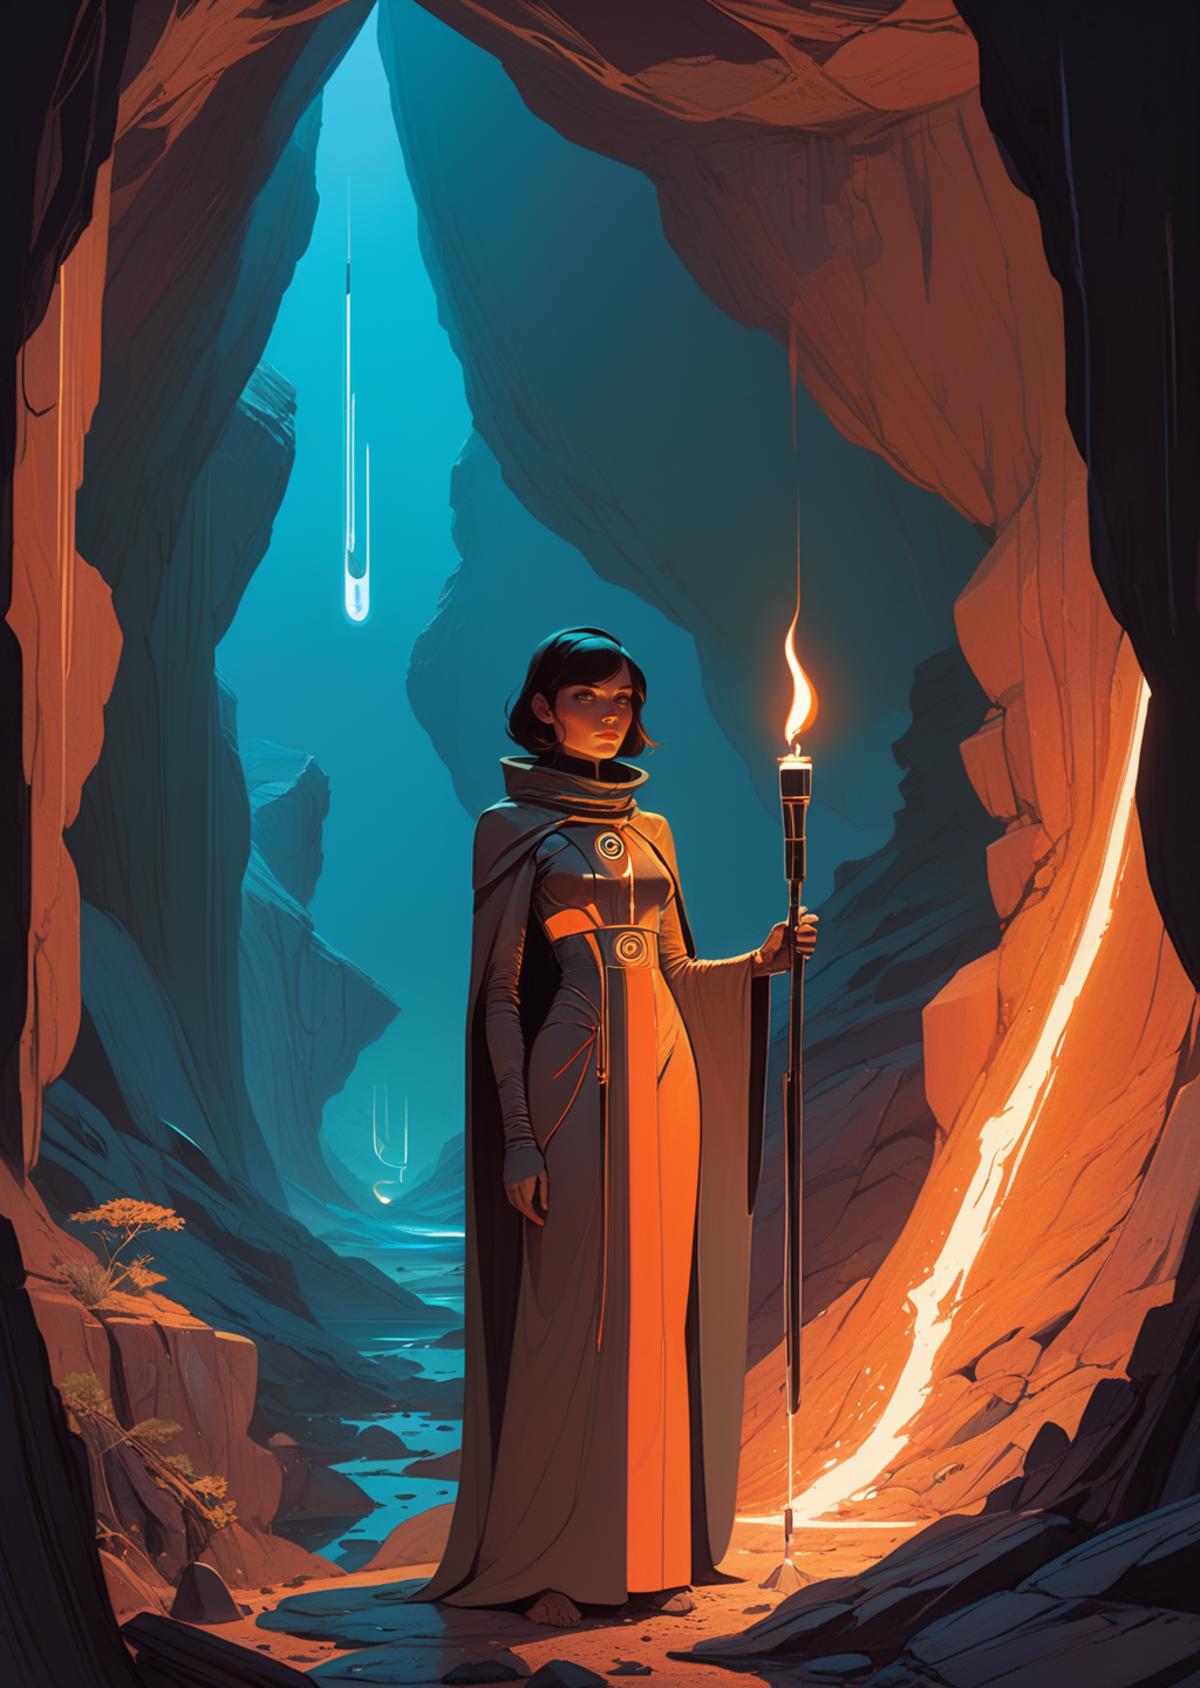 A woman in a long gown holding a torch and standing in a cave.